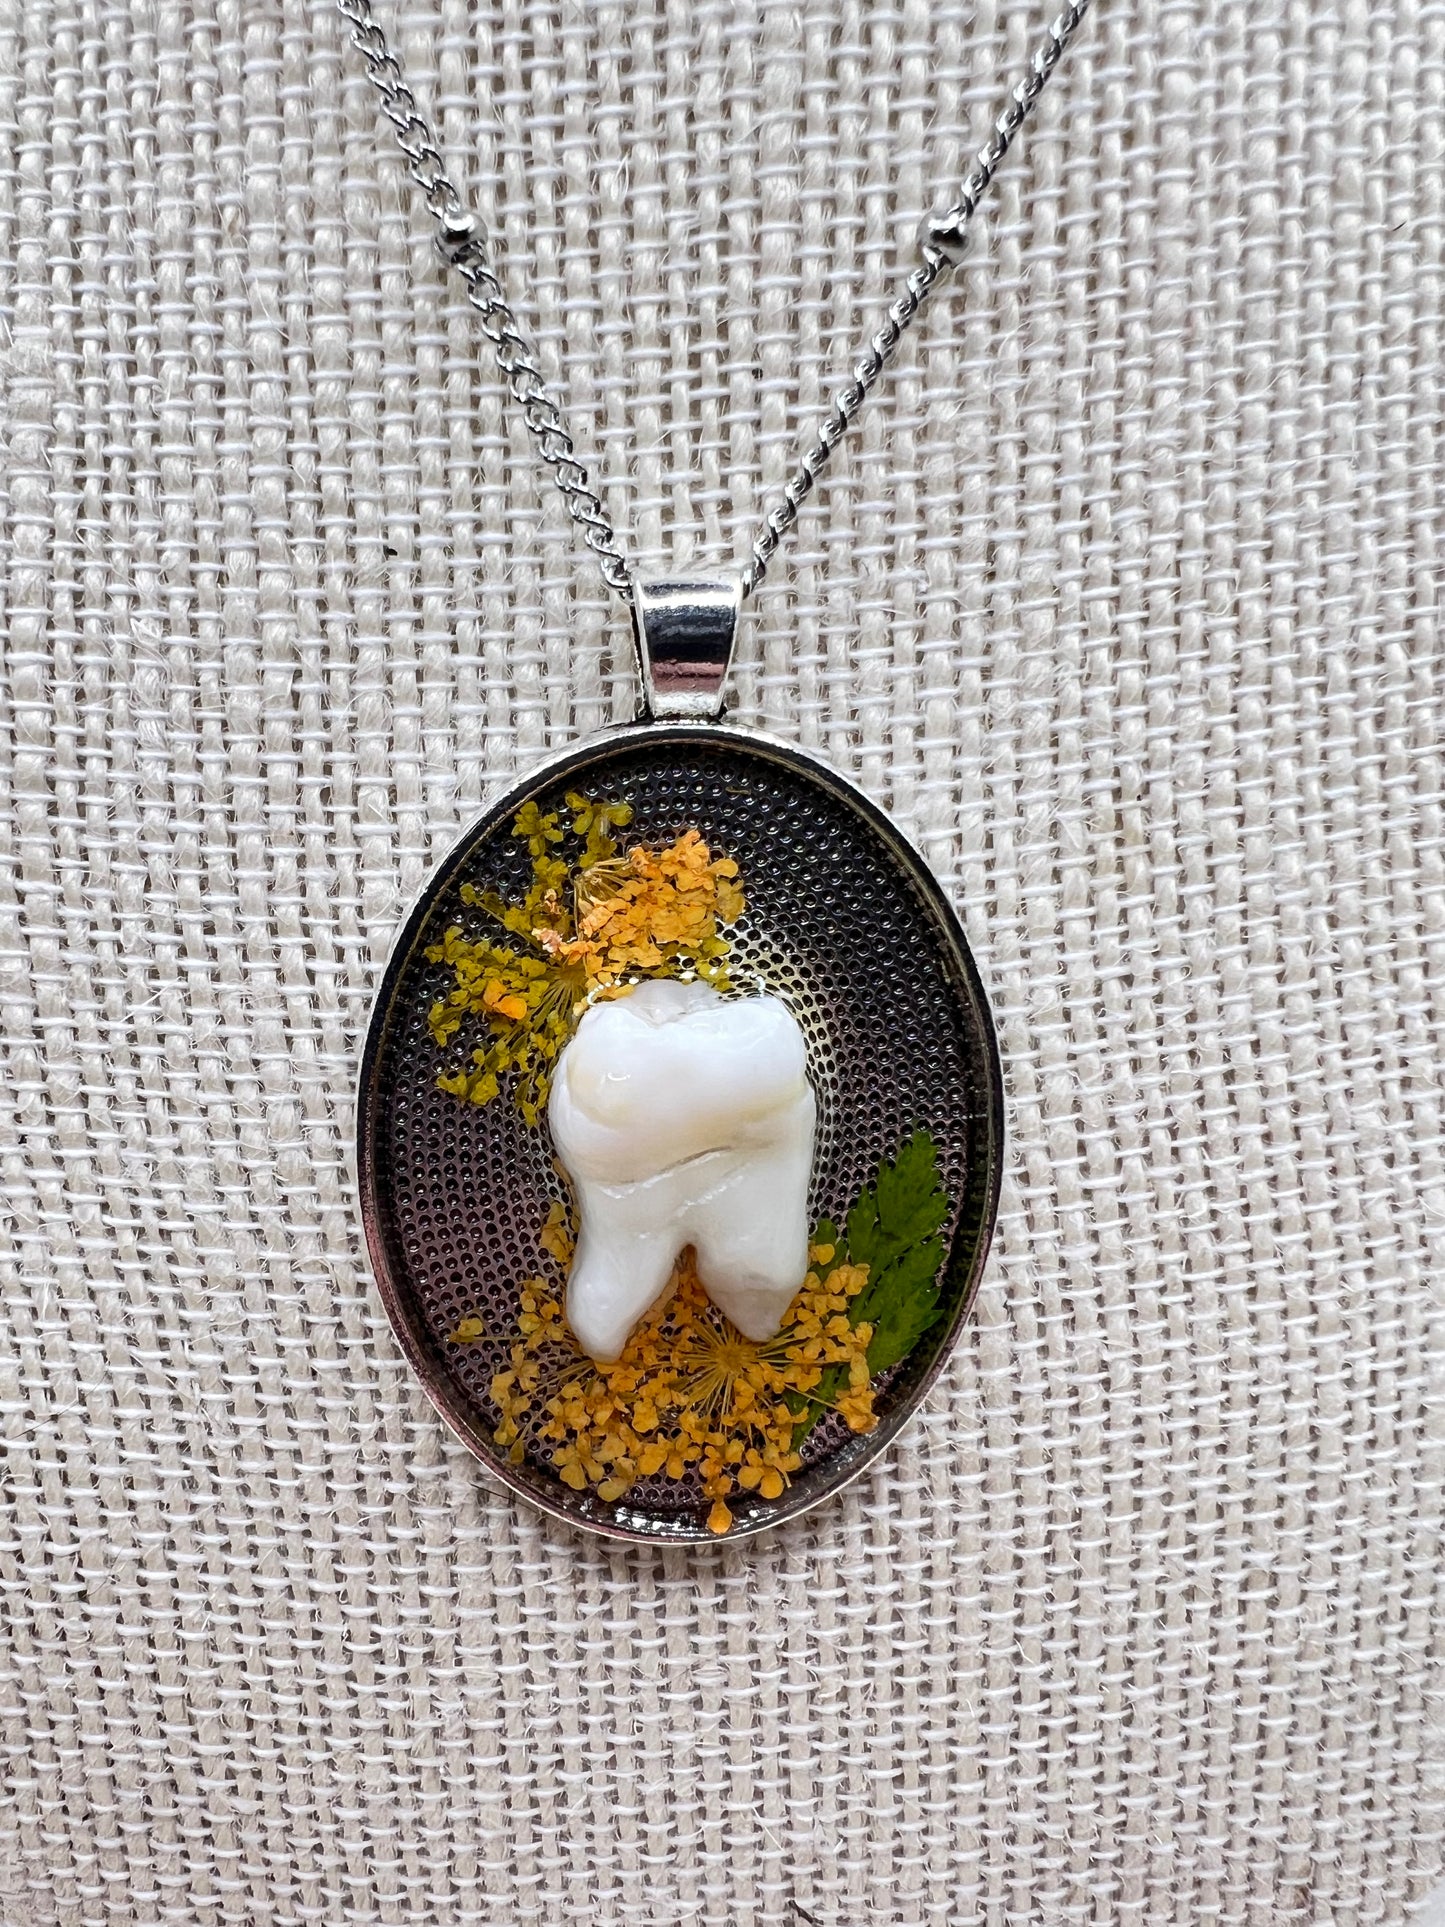 “The Empress” Human Teeth Necklace